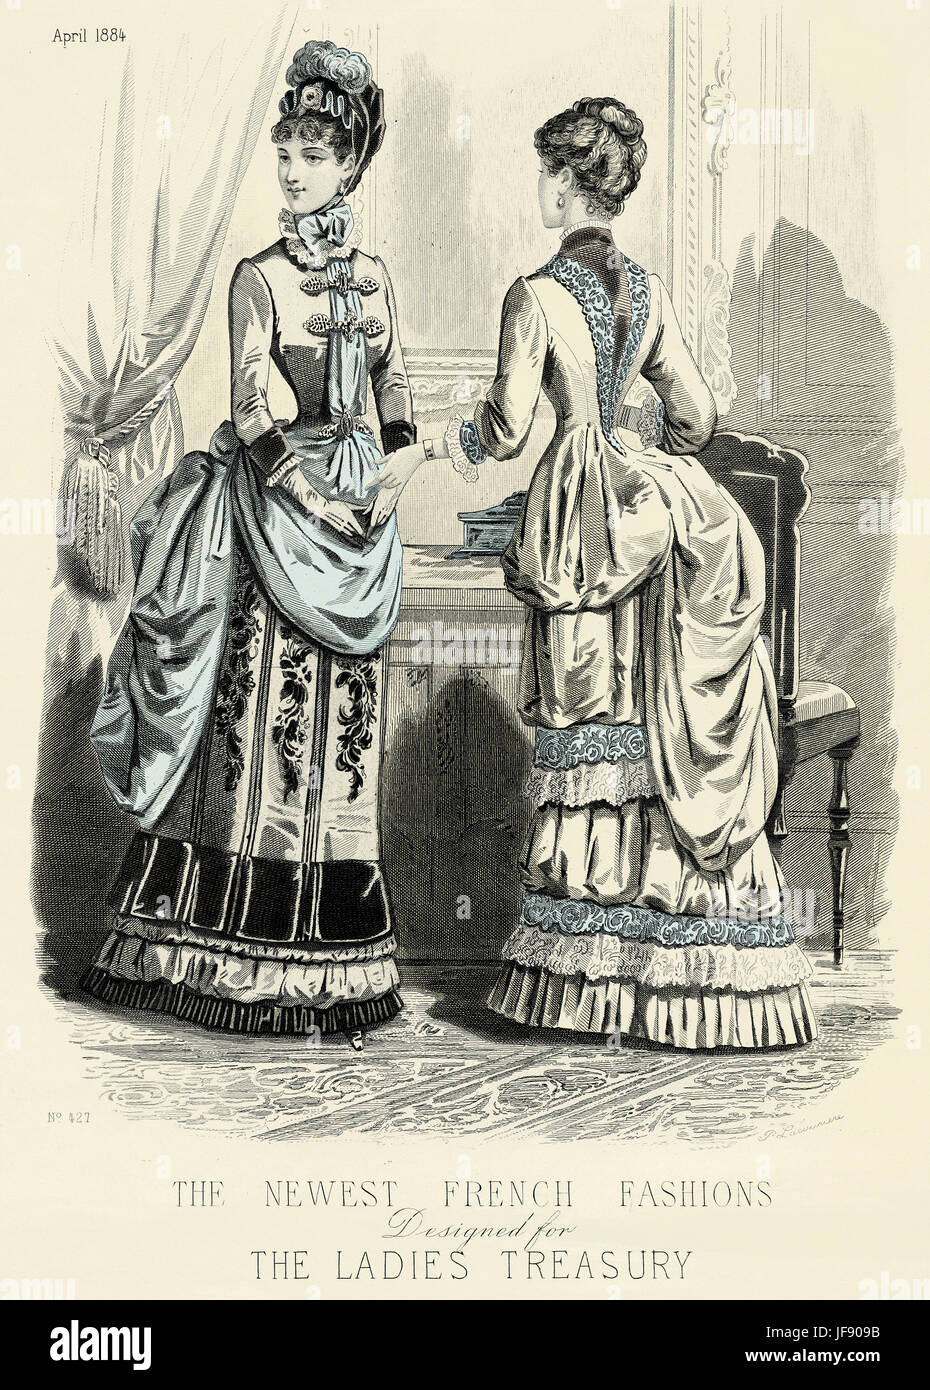 The newest French fashions designed for the Ladies Treasury..  Hand coloured fashion plate.  Shows women modellling  spring dresses with bustles and tight fitting, high necked bodices. Hair is swept up. Stock Photo